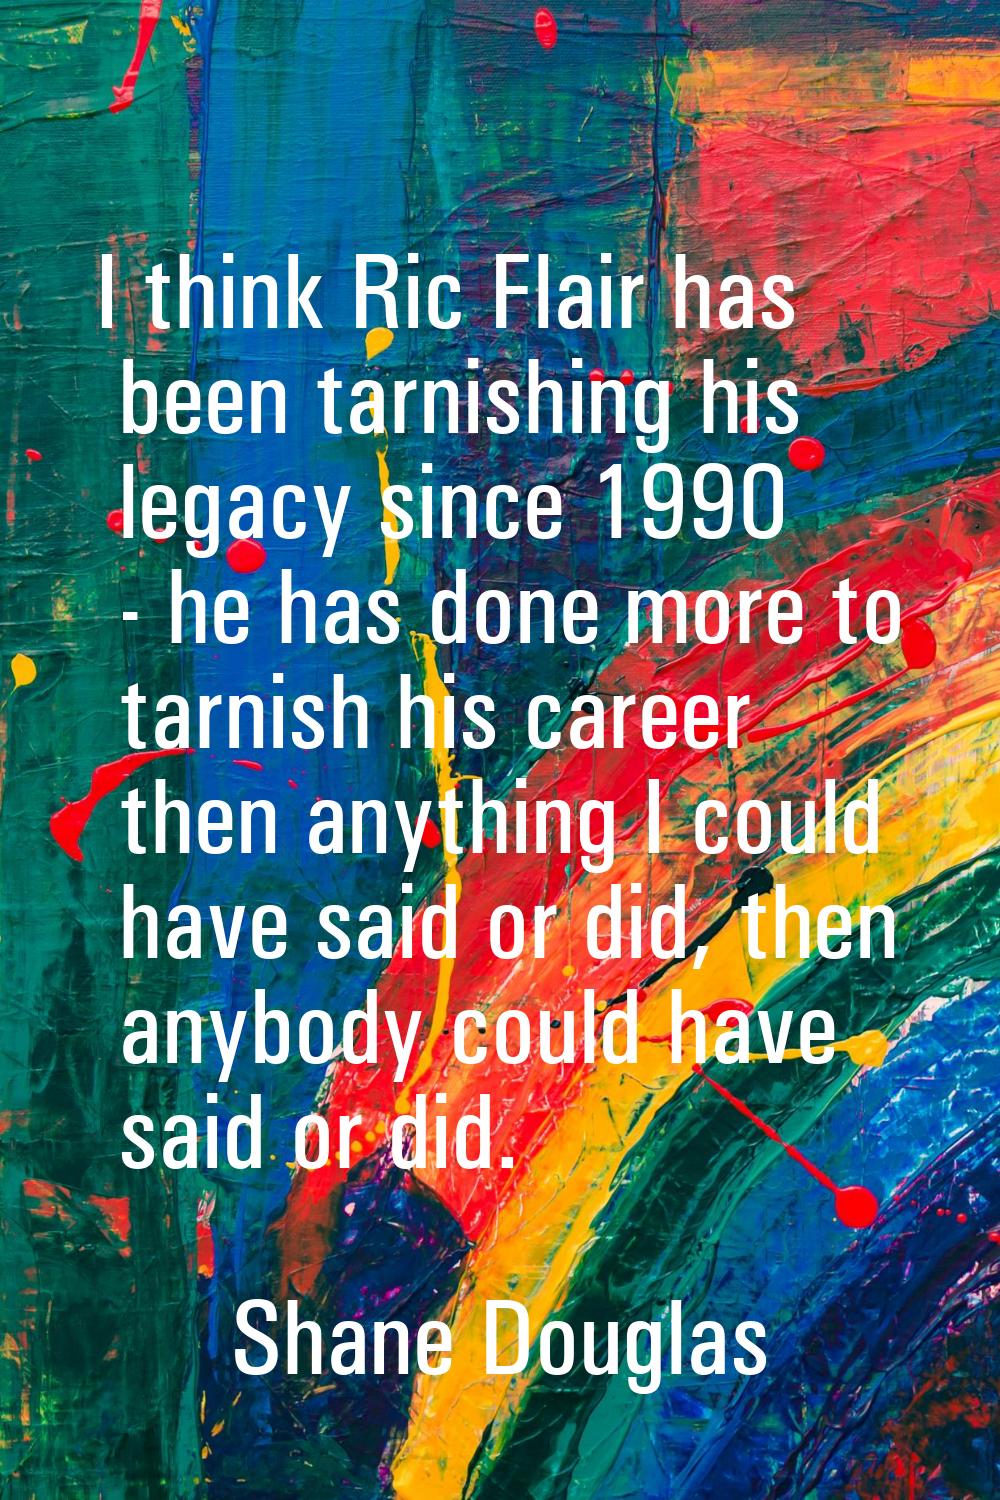 I think Ric Flair has been tarnishing his legacy since 1990 - he has done more to tarnish his caree